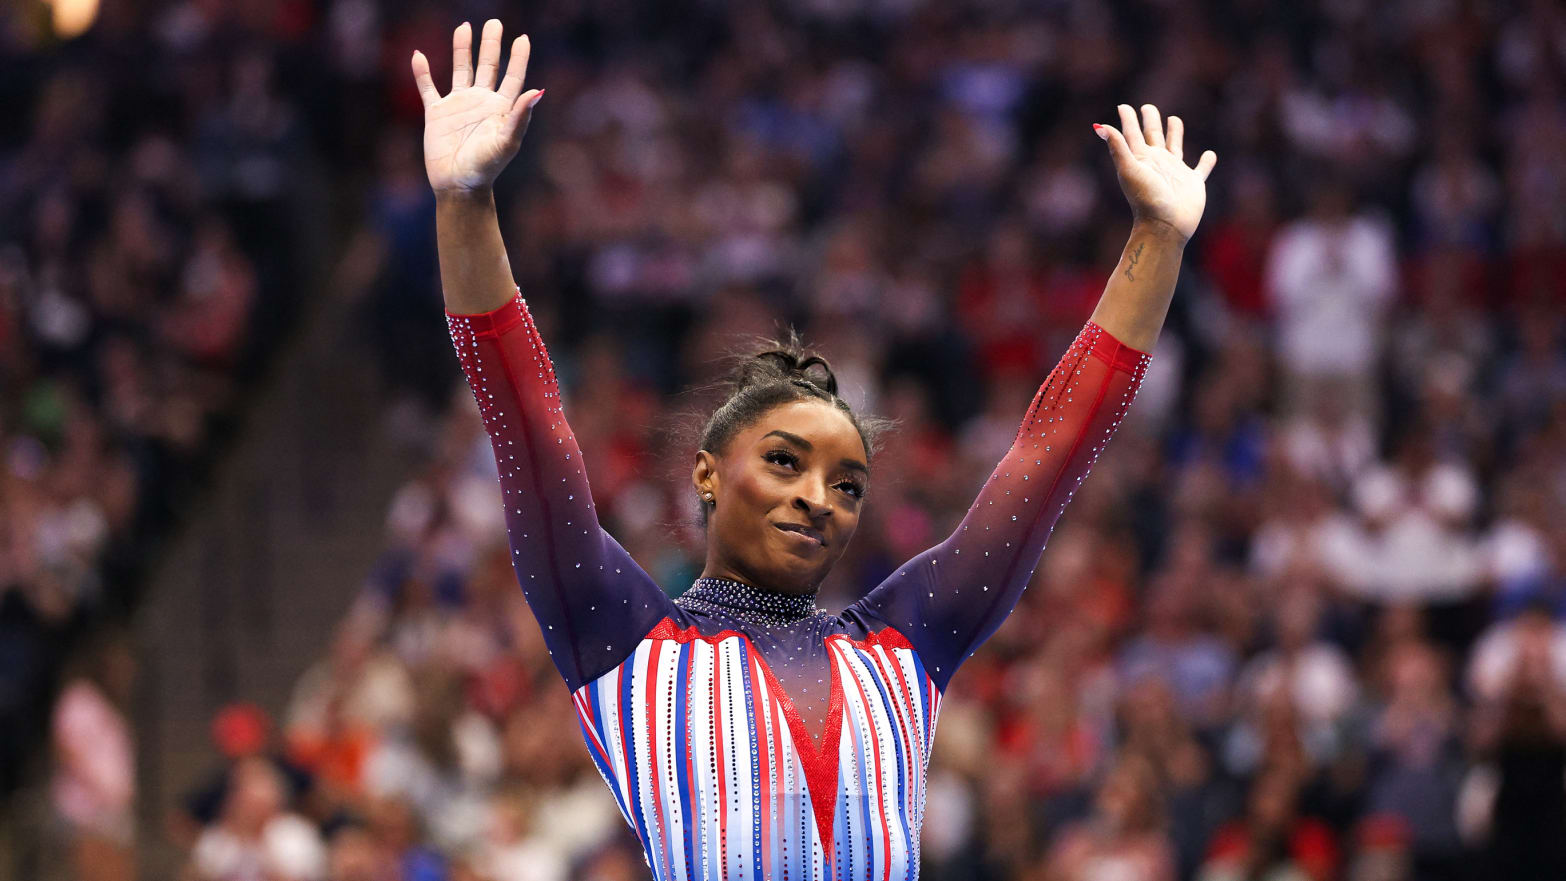 Simone Biles celebrates her floor routine during the U.S. Olympic Team Gymnastics Trials at Target Center. 